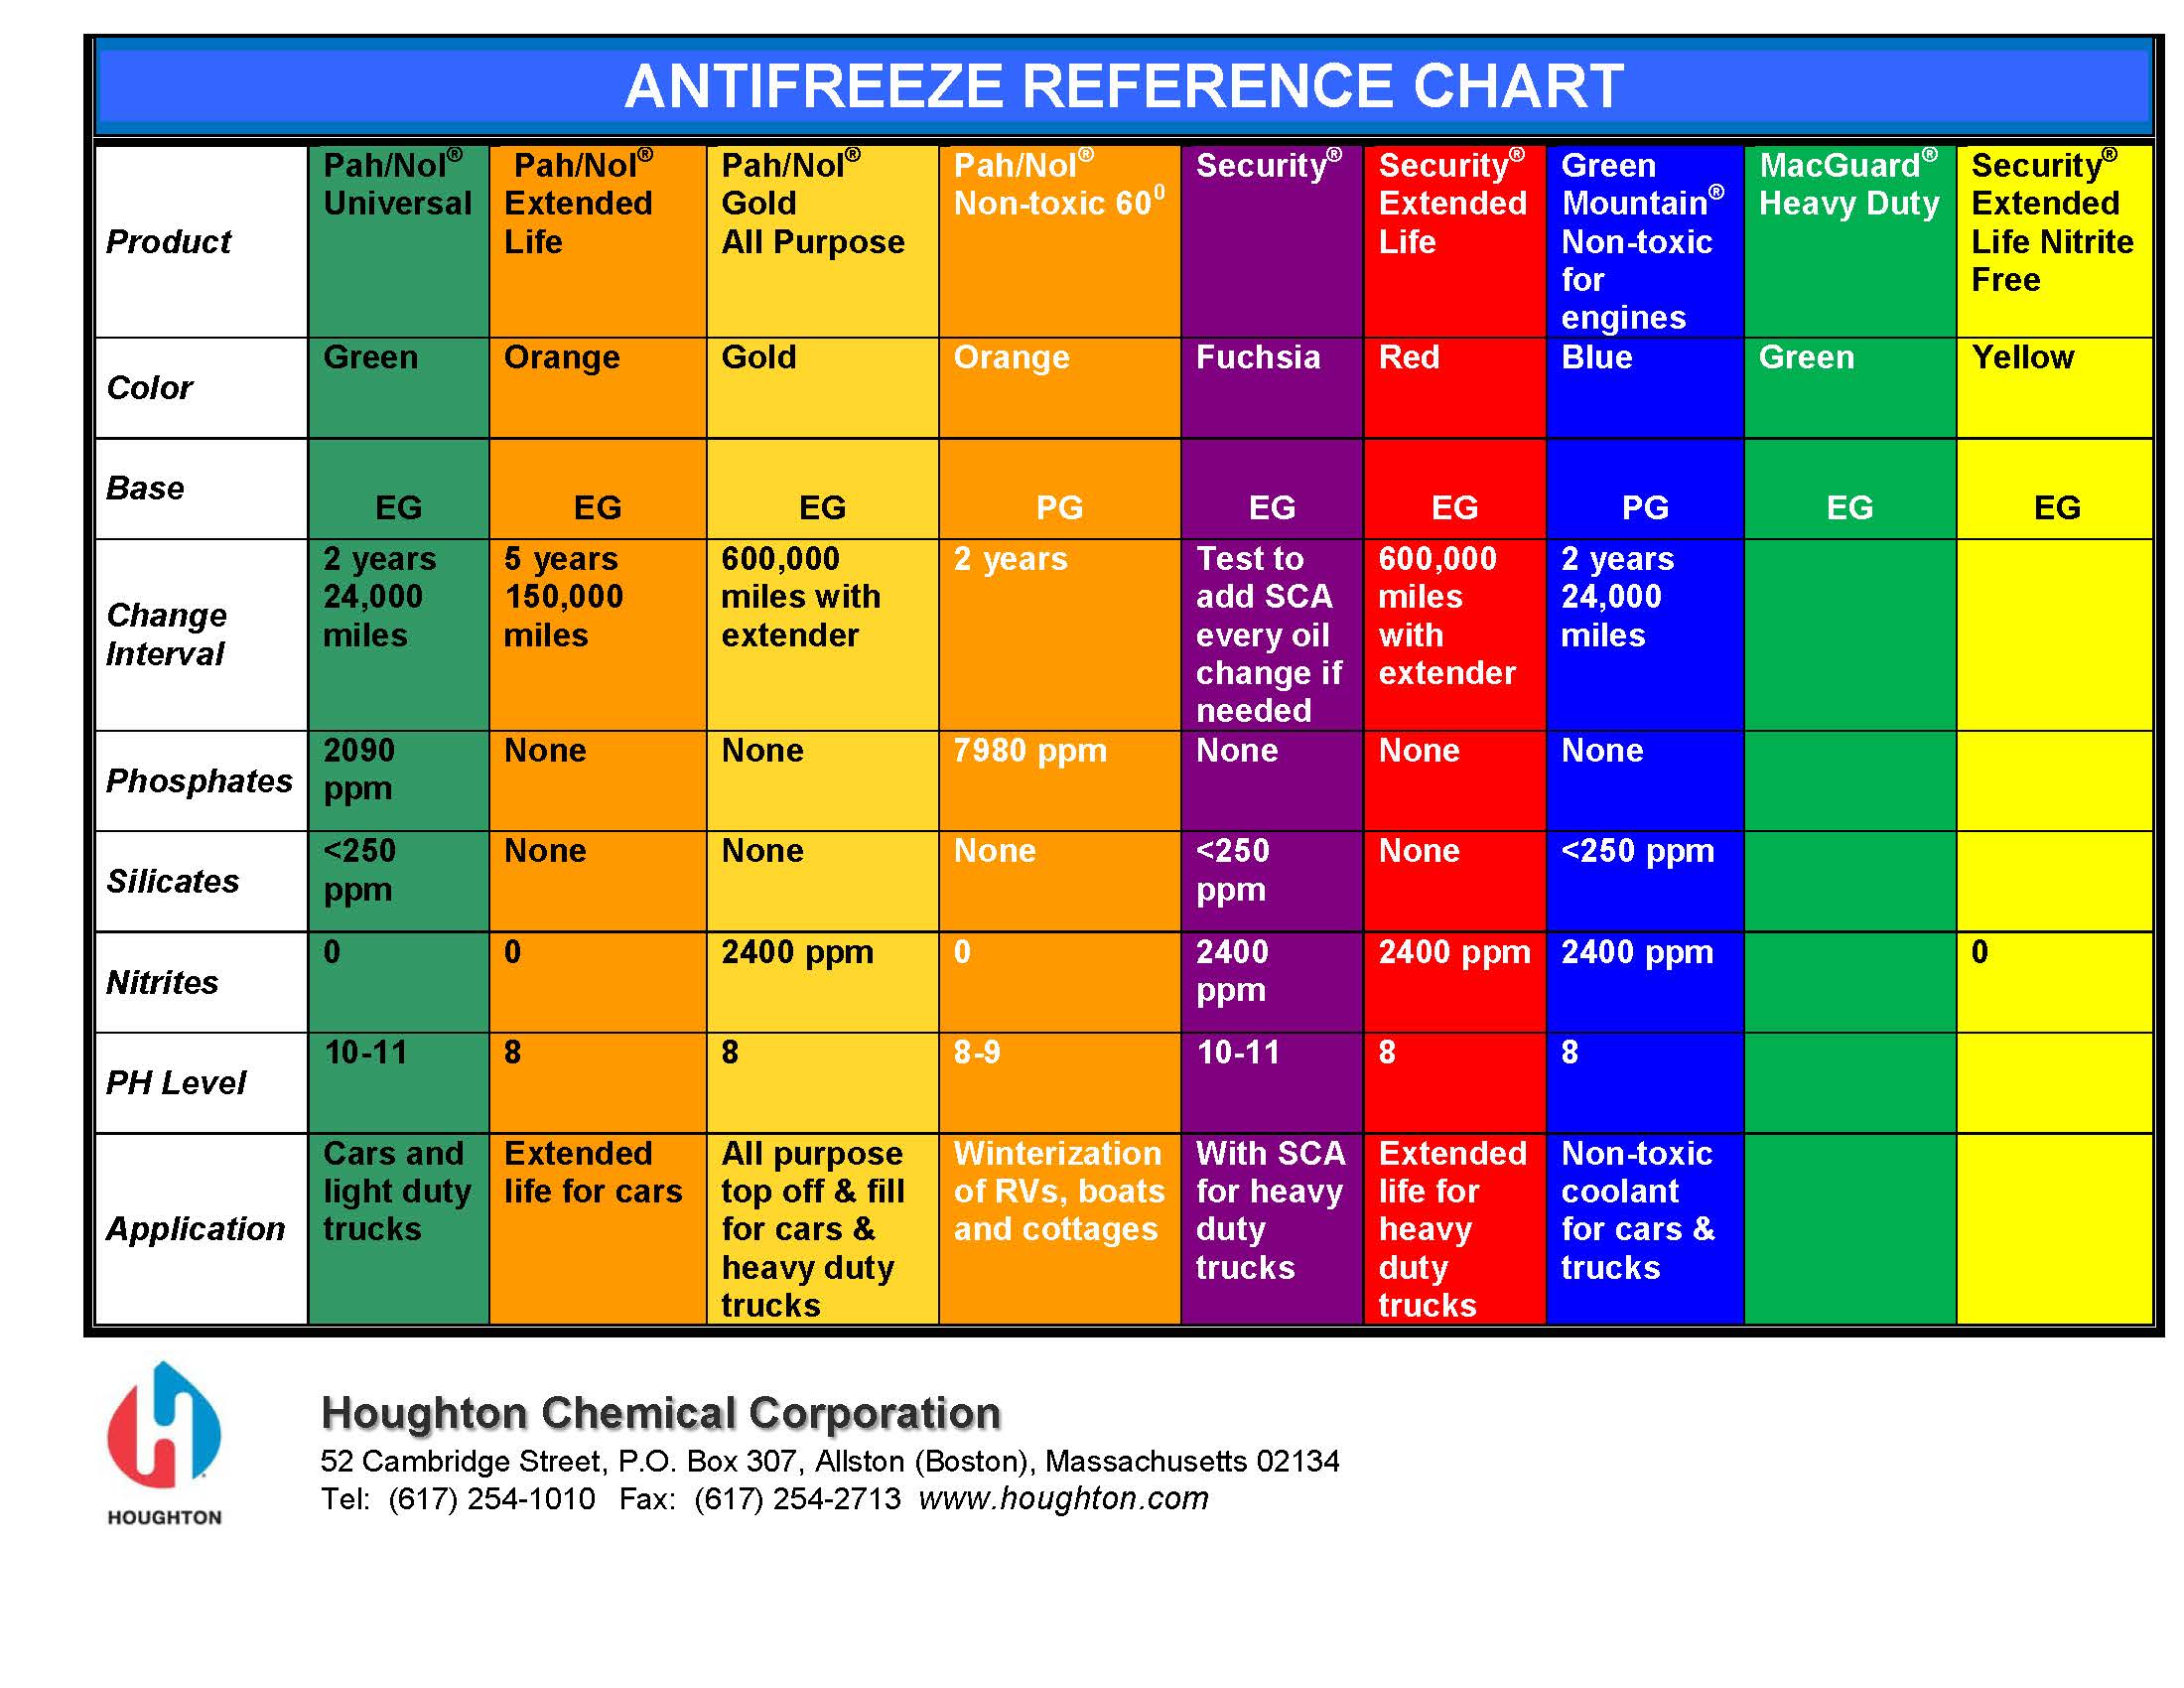 Antifreeze_Reference_Chart_colors.jpg